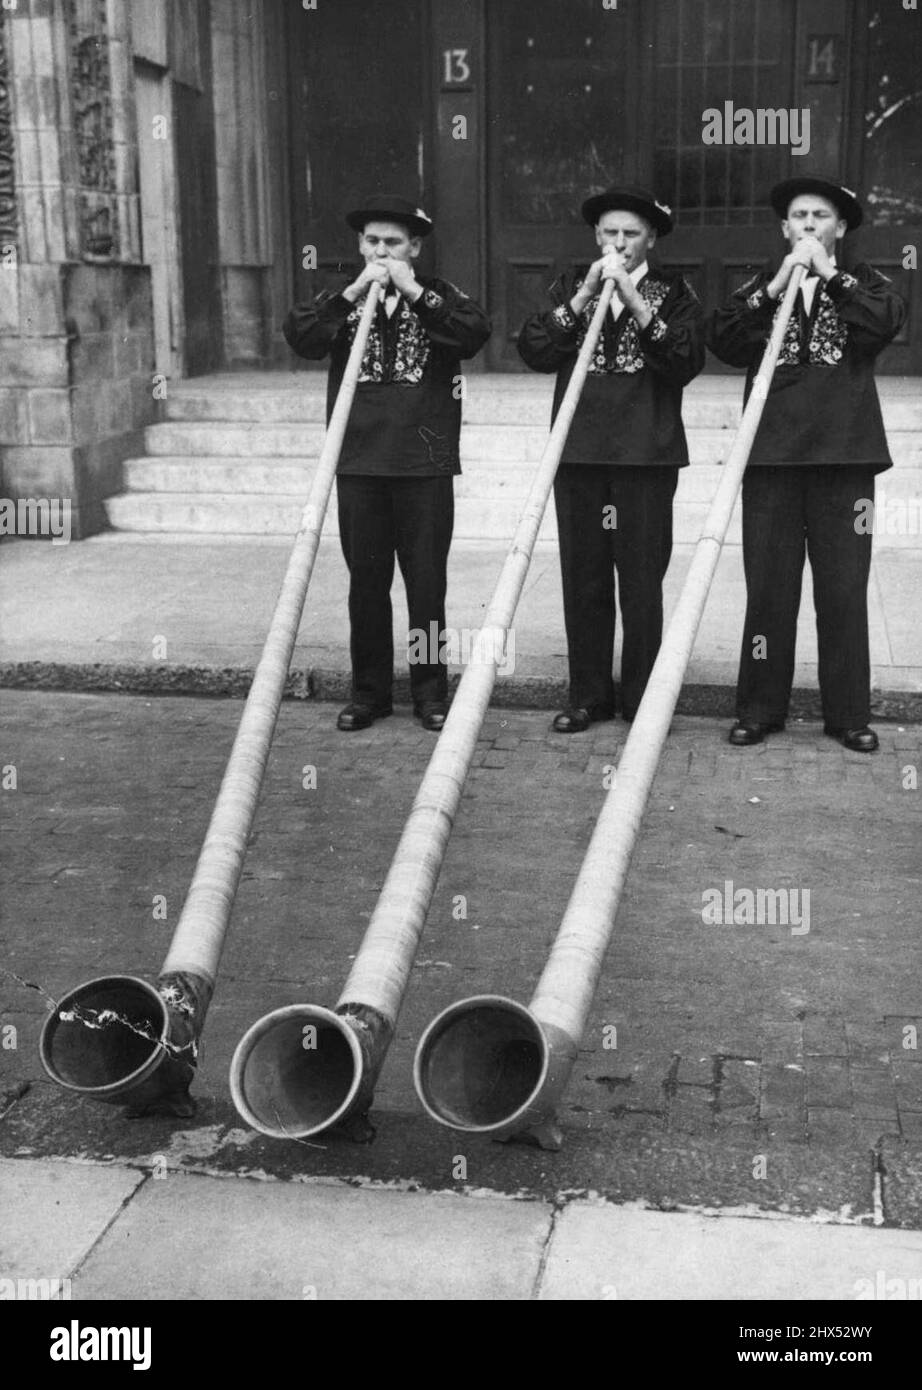 Blowing Their Own Trumpets! -- Swiss mountaineers demonstrating their skill on the 12 feet long wooden alp-horns. The men are among the 145 Swiss men and women taking part in the Swiss Folklore Festival at the Royal Albert Hall, London. Each participant is paying his or her own expenses as a tribute to the wartime work of the Royal Air Force. May 25, 1948. (Photo by Sport & General Press Agency, Limited). Stock Photo